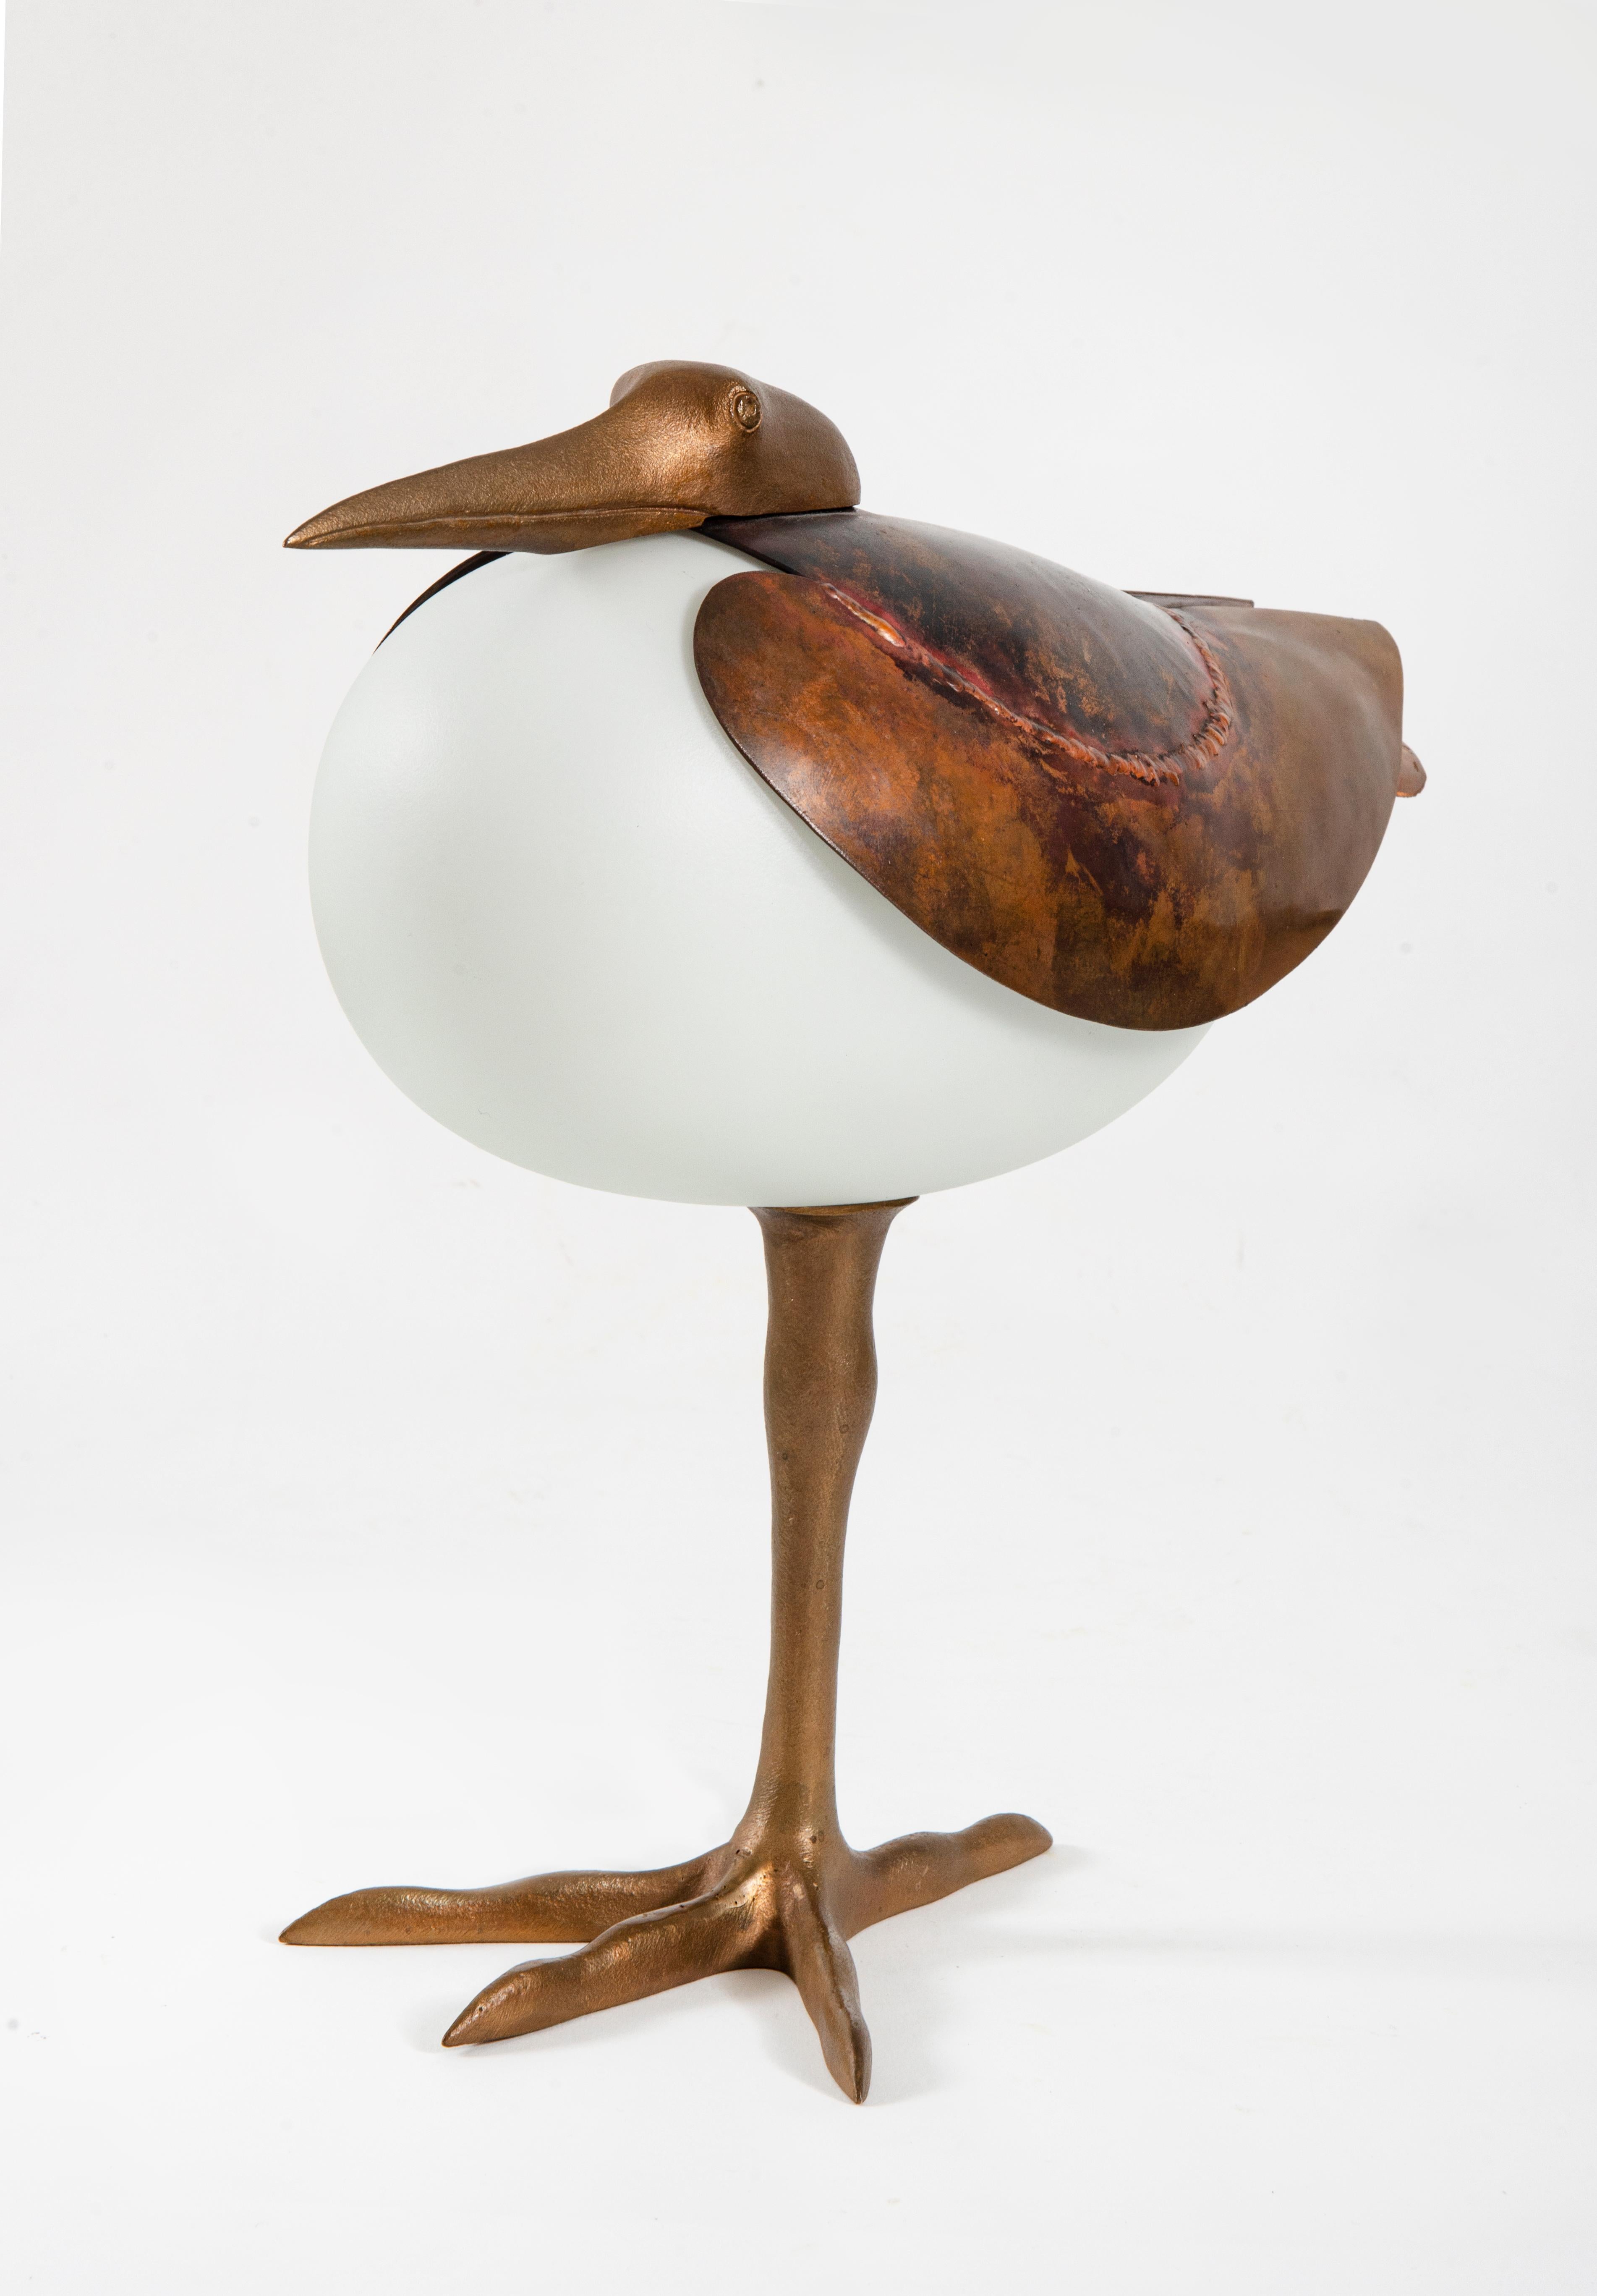 Petit Echassier, Lalanne, Animals, Design, Desklamp, Art Decoratifs, Bird, Lamp

Petit Echassier
Ed. 1500 pcs
circa 1994
Gilt bronze, patinated copper and glass
28.5 x 13 x 34 cm / 11 x 5.1 x 13.4 in.
Monogrammed, numbered and editor's mark on the